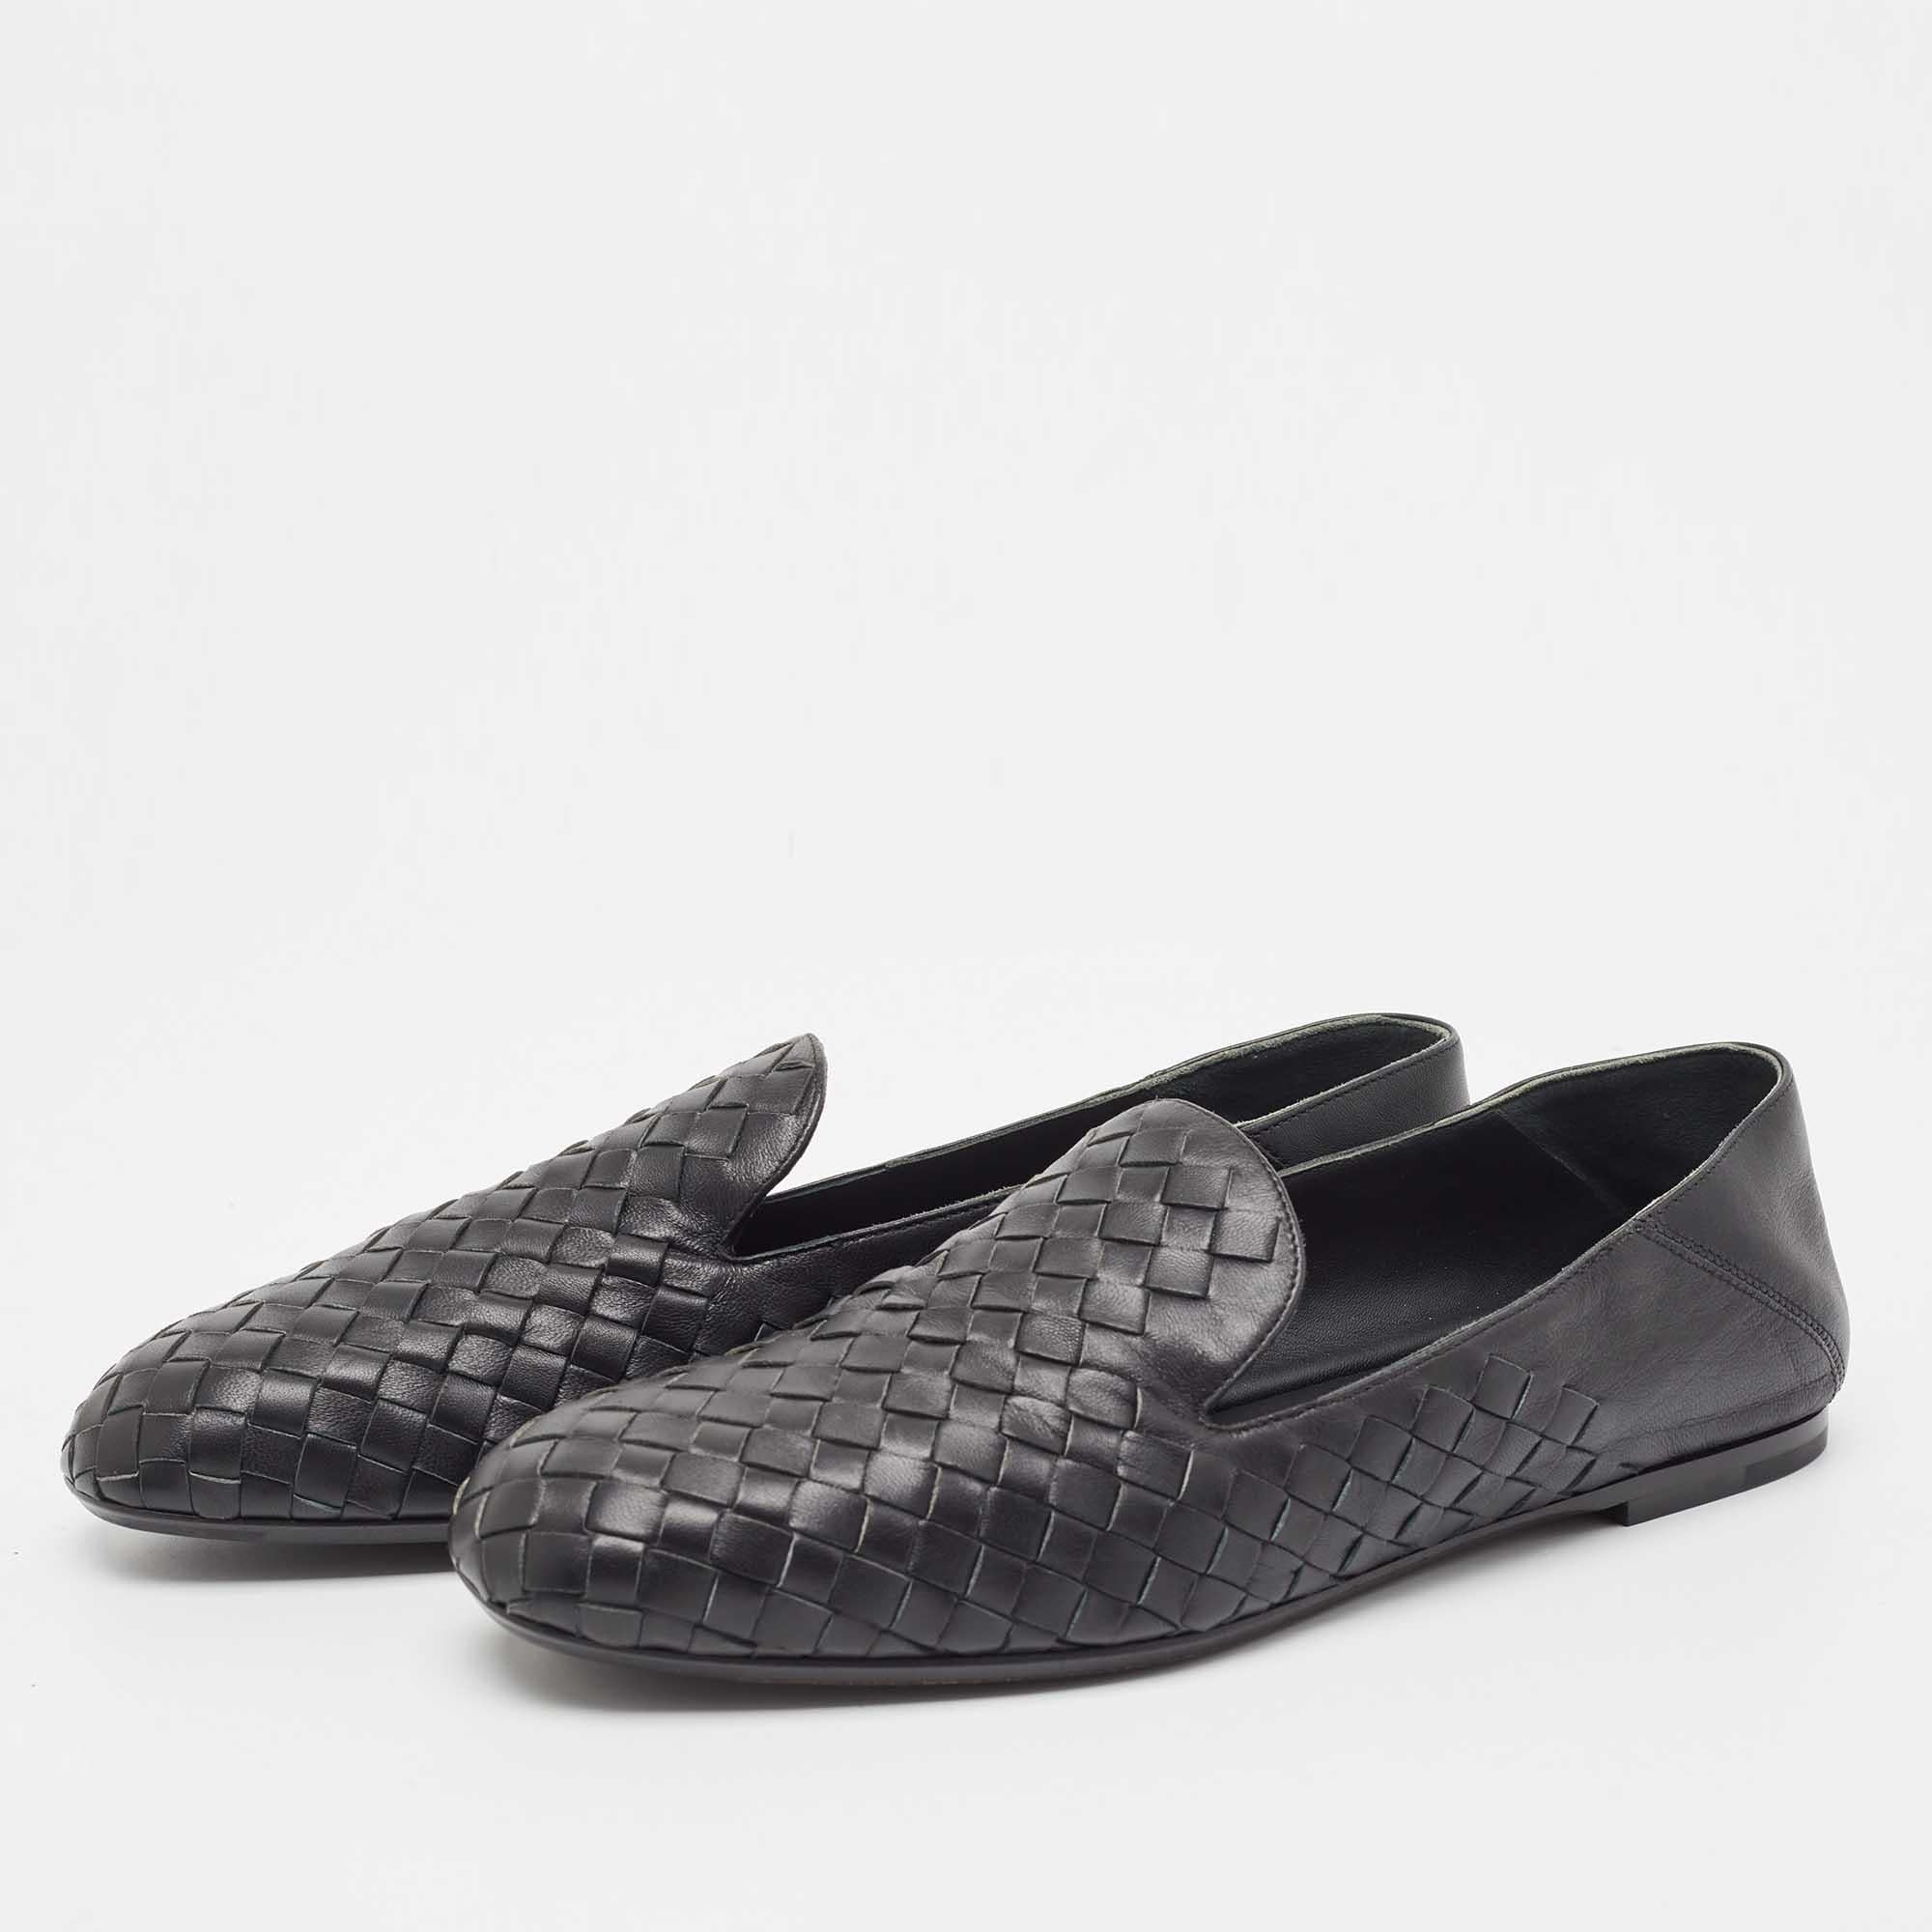 This pair of loafers by Bottega Veneta is so comfy, you'll love putting them on wherever you go. The exterior of the pair has been crafted from black leather in their signature Intrecciato weave pattern. They are stylish and easy to slip on.

